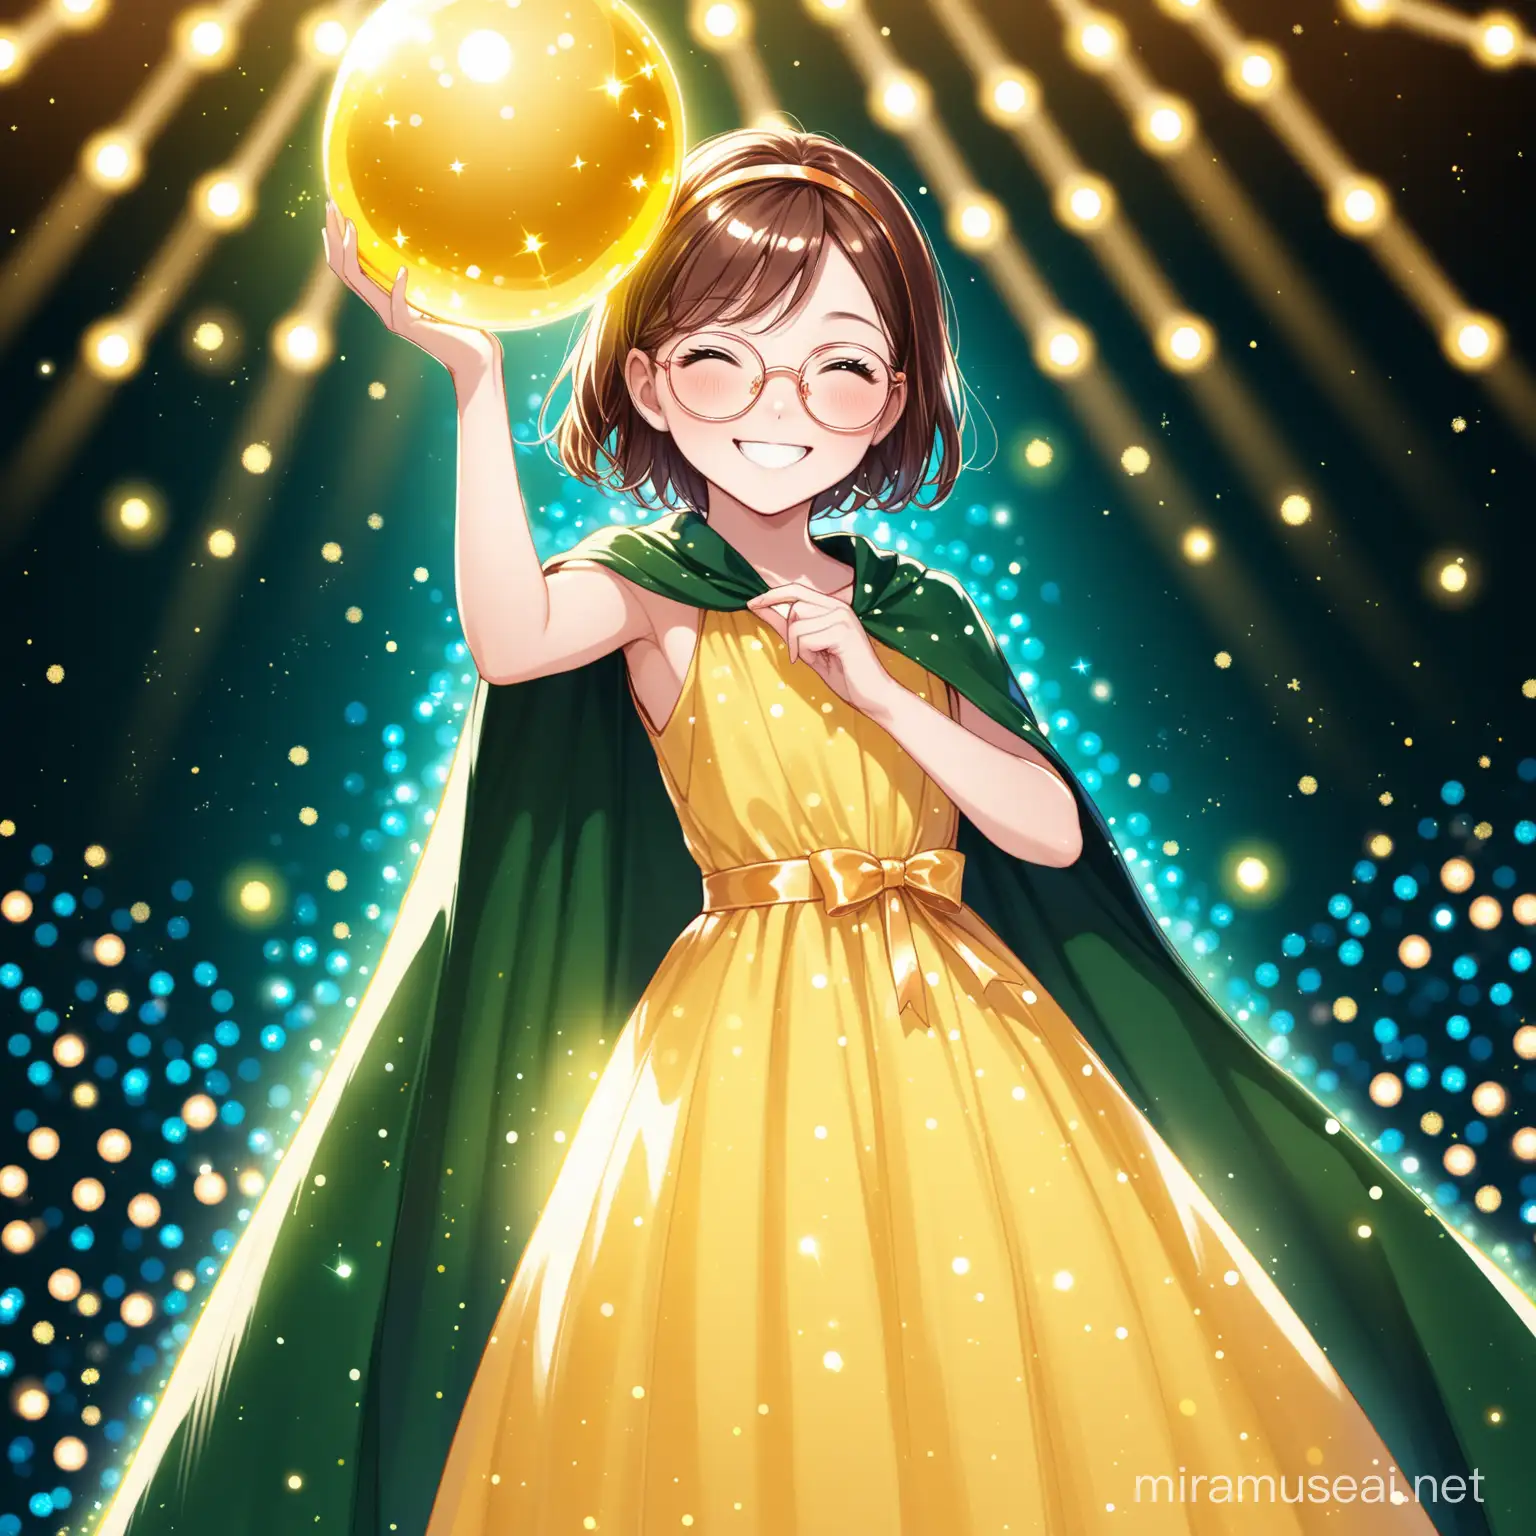 12 year old girl, short brown hair, rose gold glasses, smiling, wearing long yellow dress, wearing dark green cloak, holding glowing yellow ball, head band, background of stage with lights and glitter